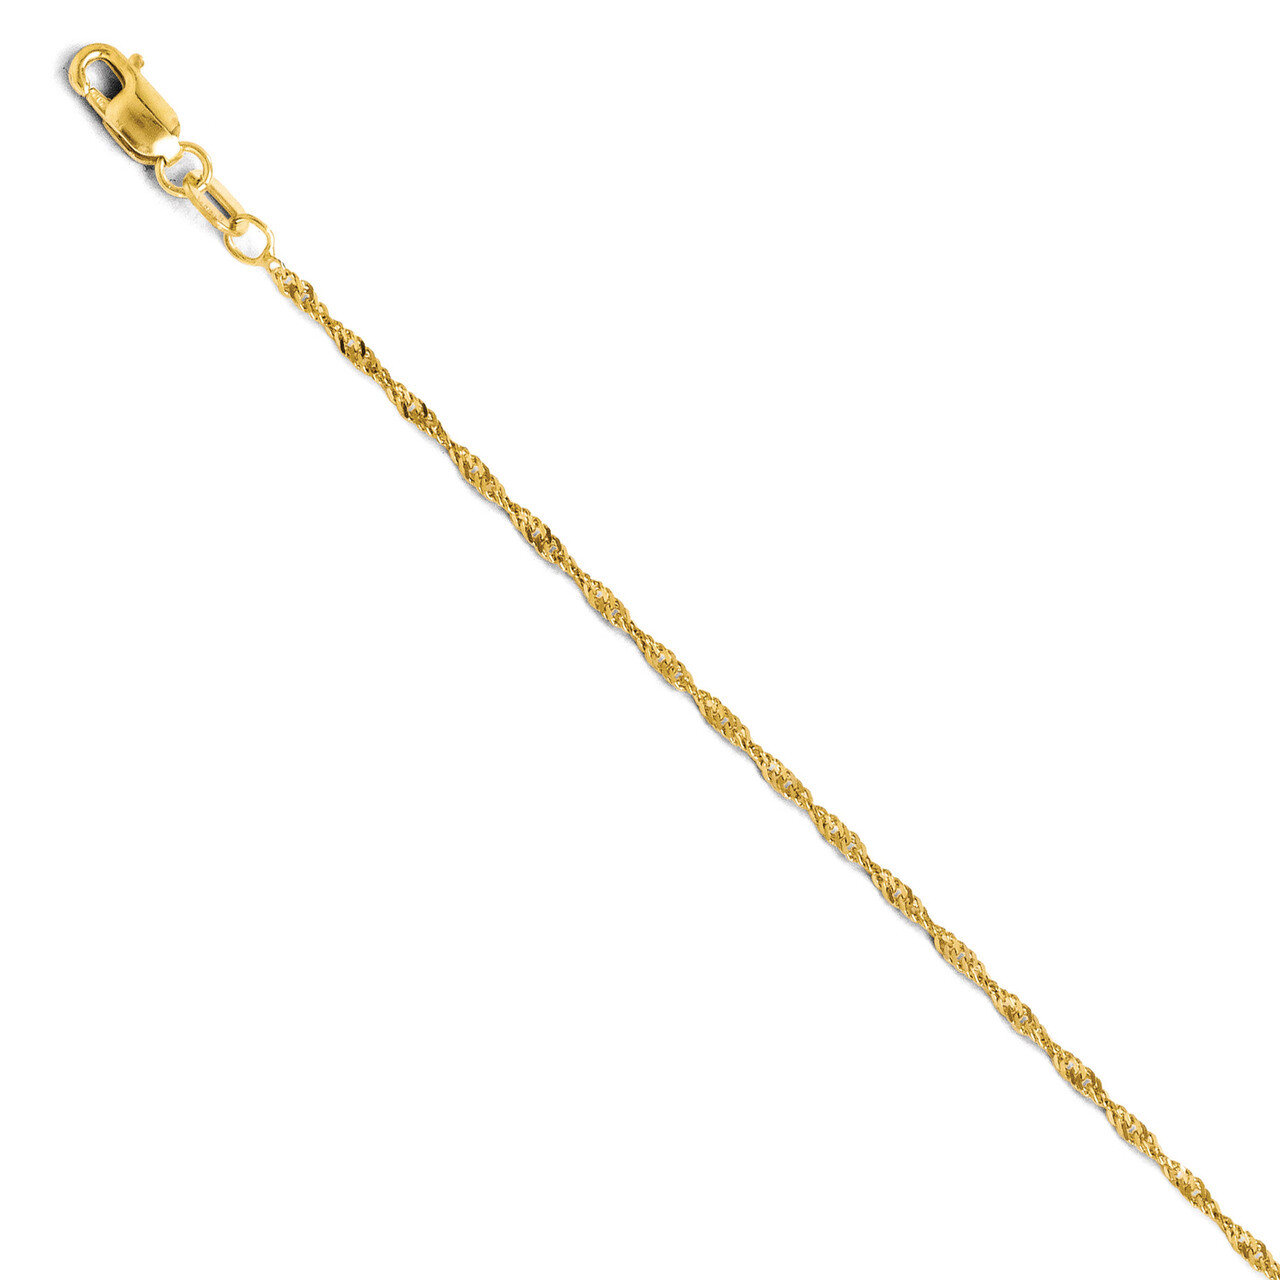 Singapore with Lock Chain 24 Inch - 14k Gold HB-503-24